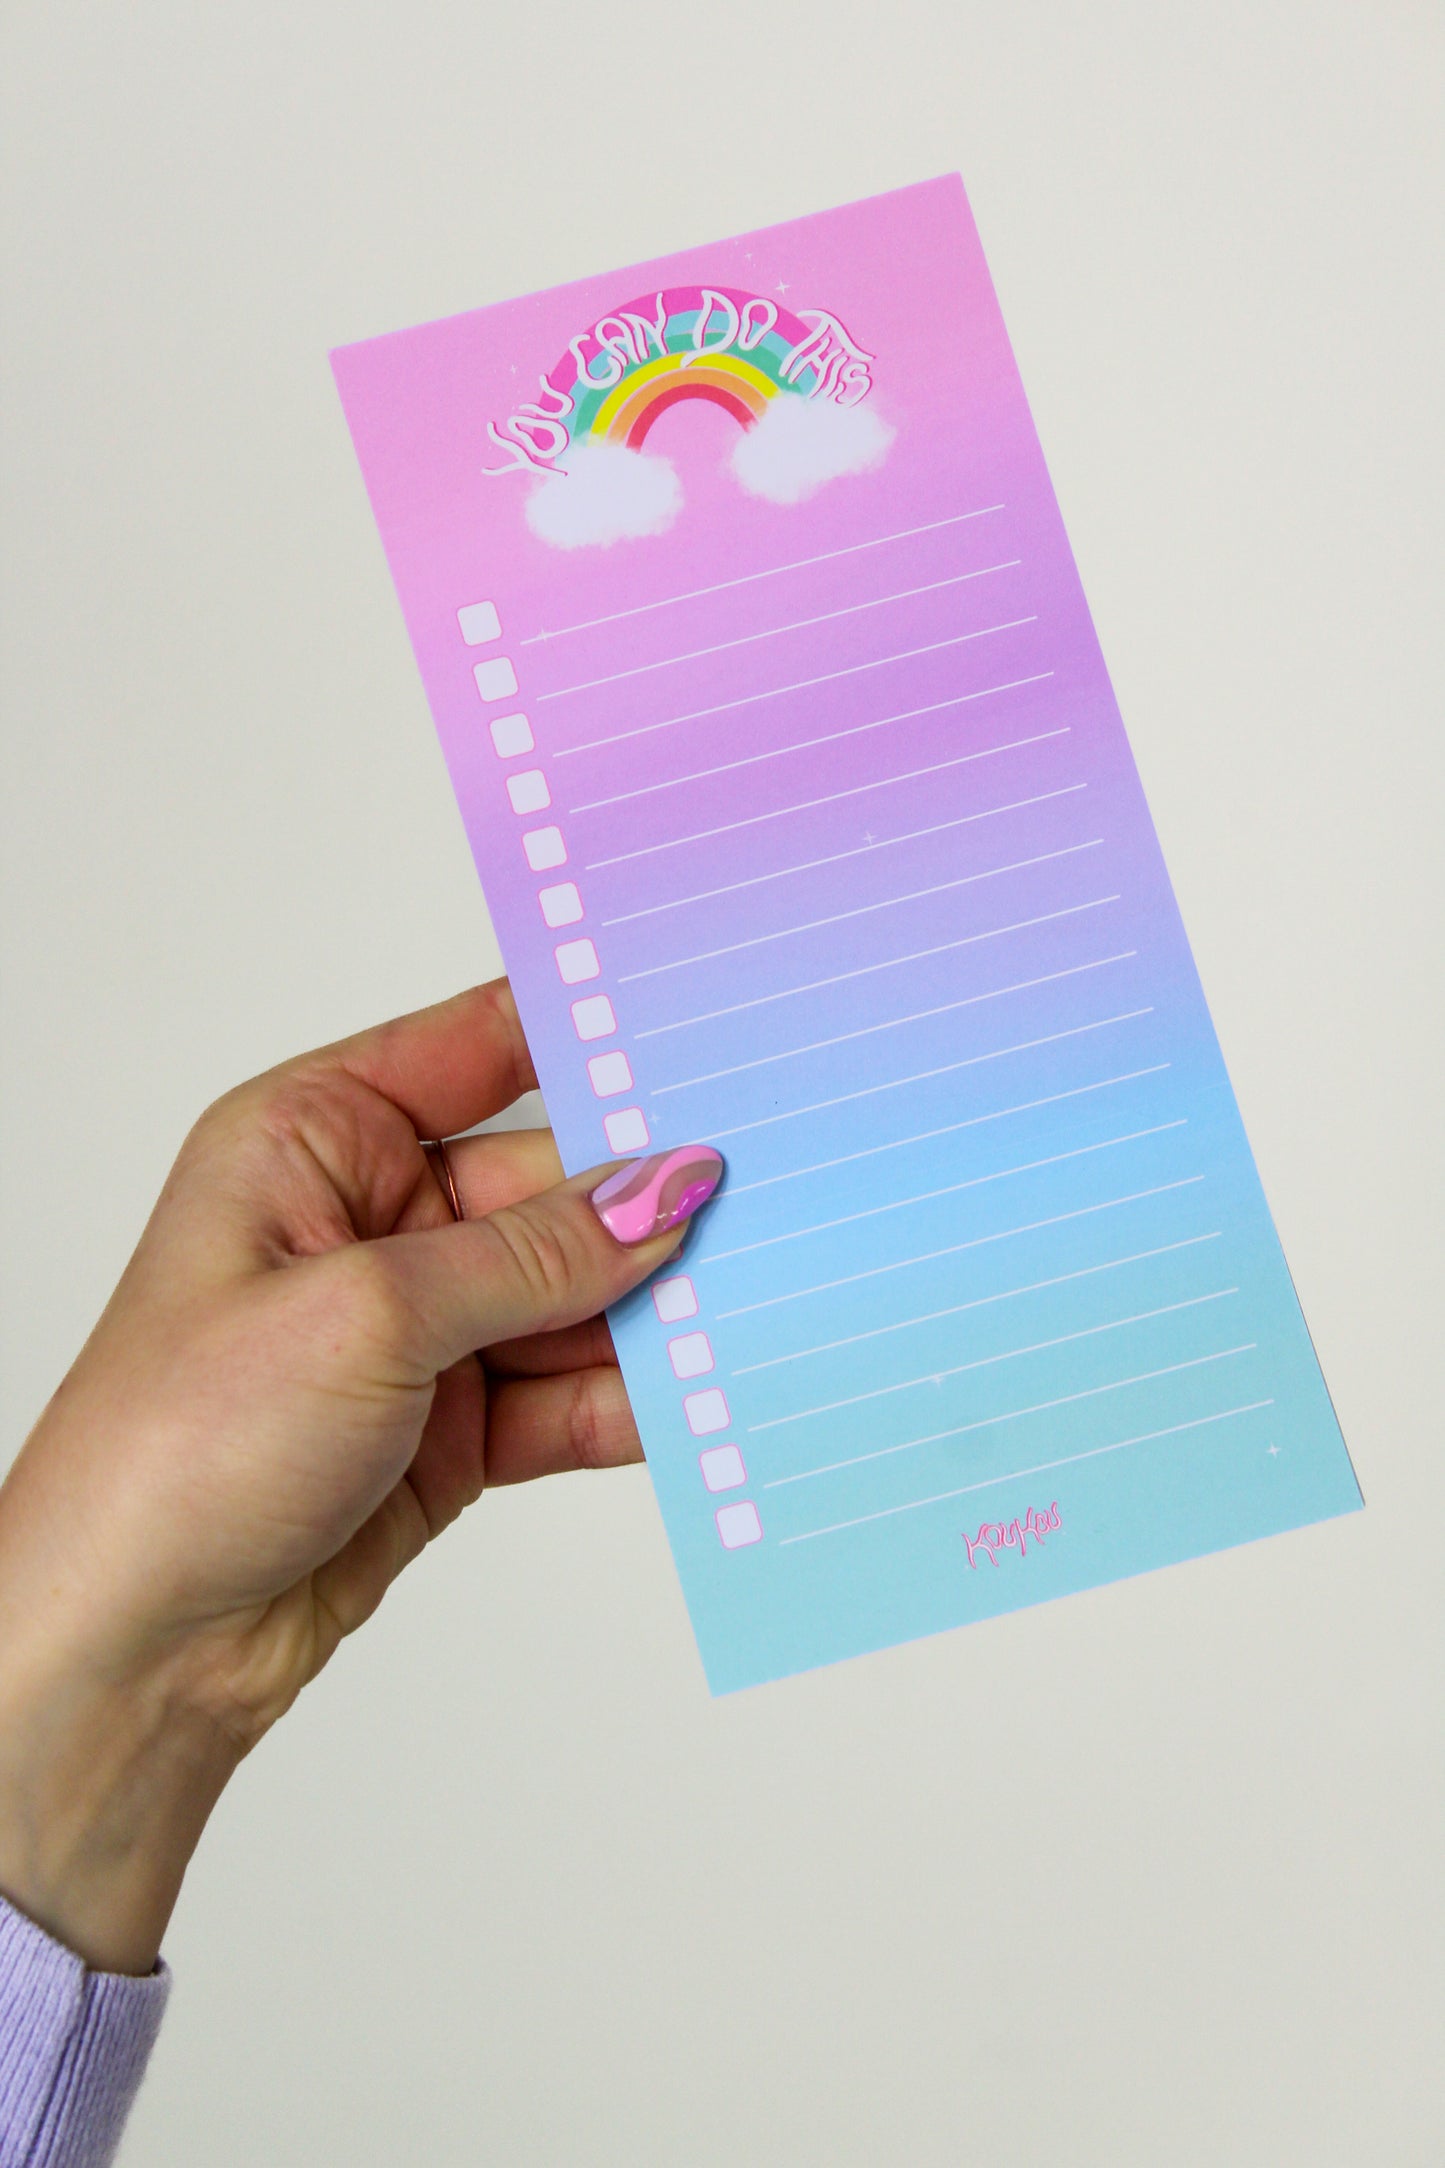 You can do this note pad!